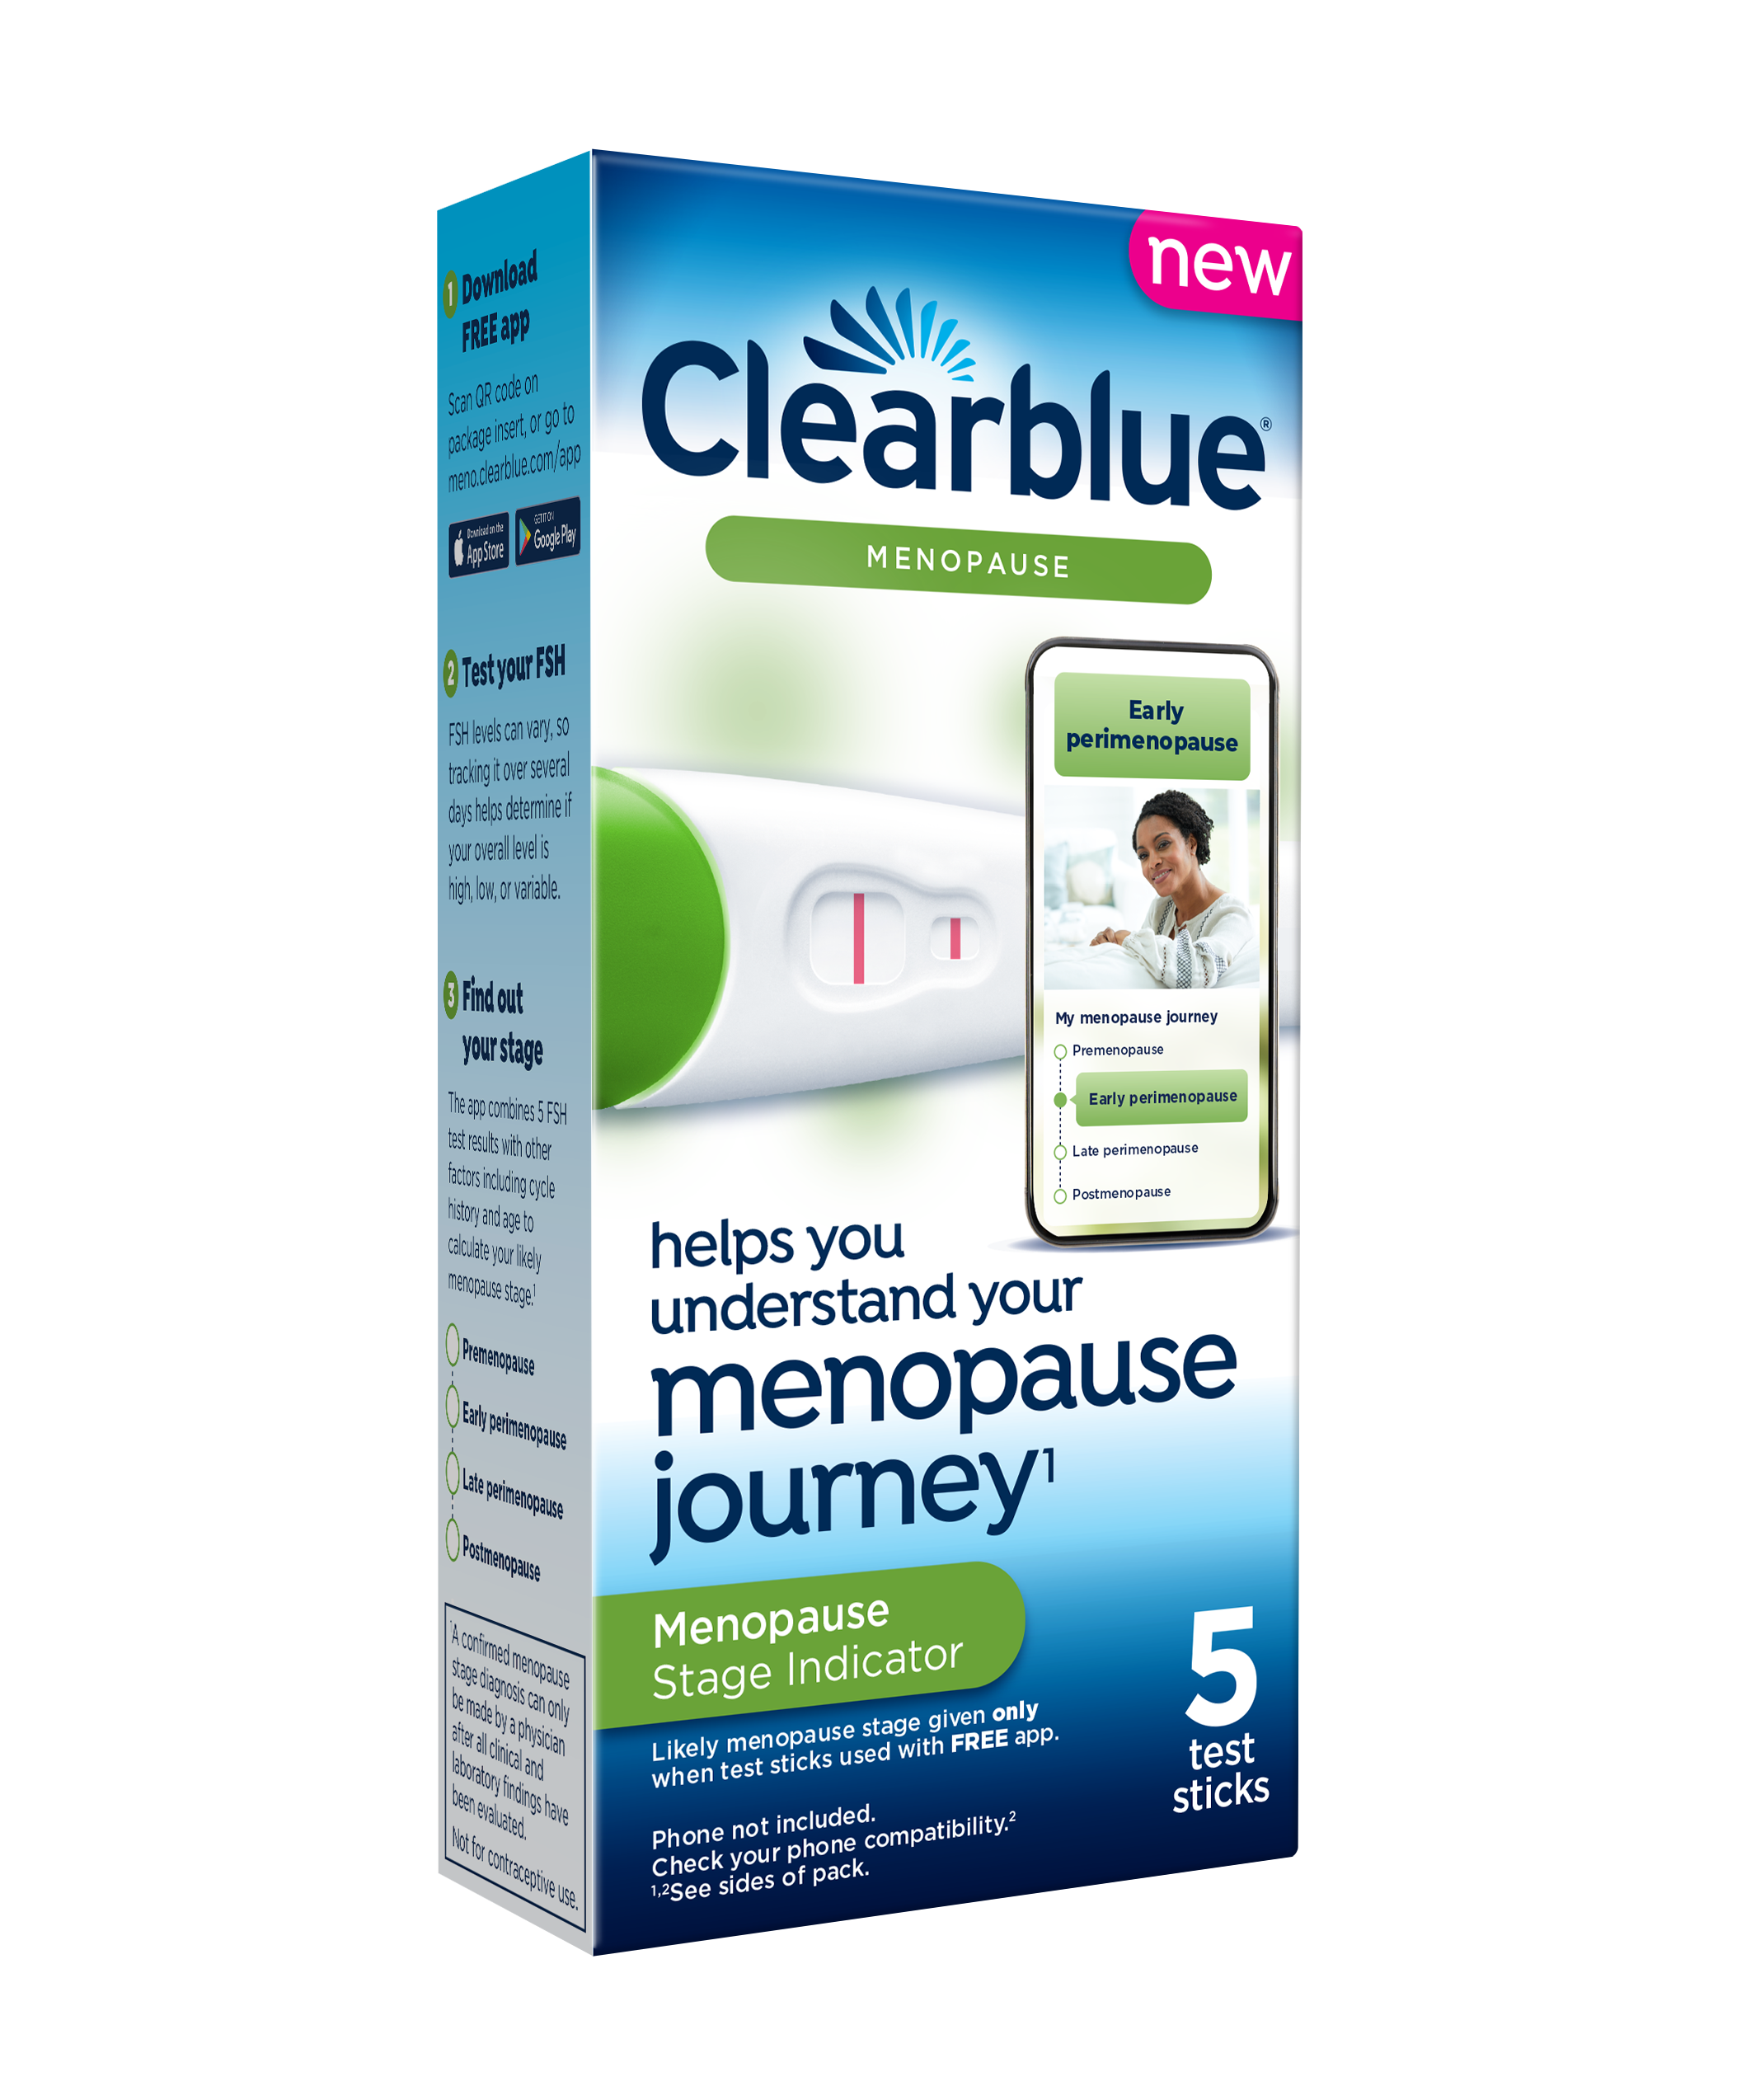 A Clearblue at-home menopause test kit